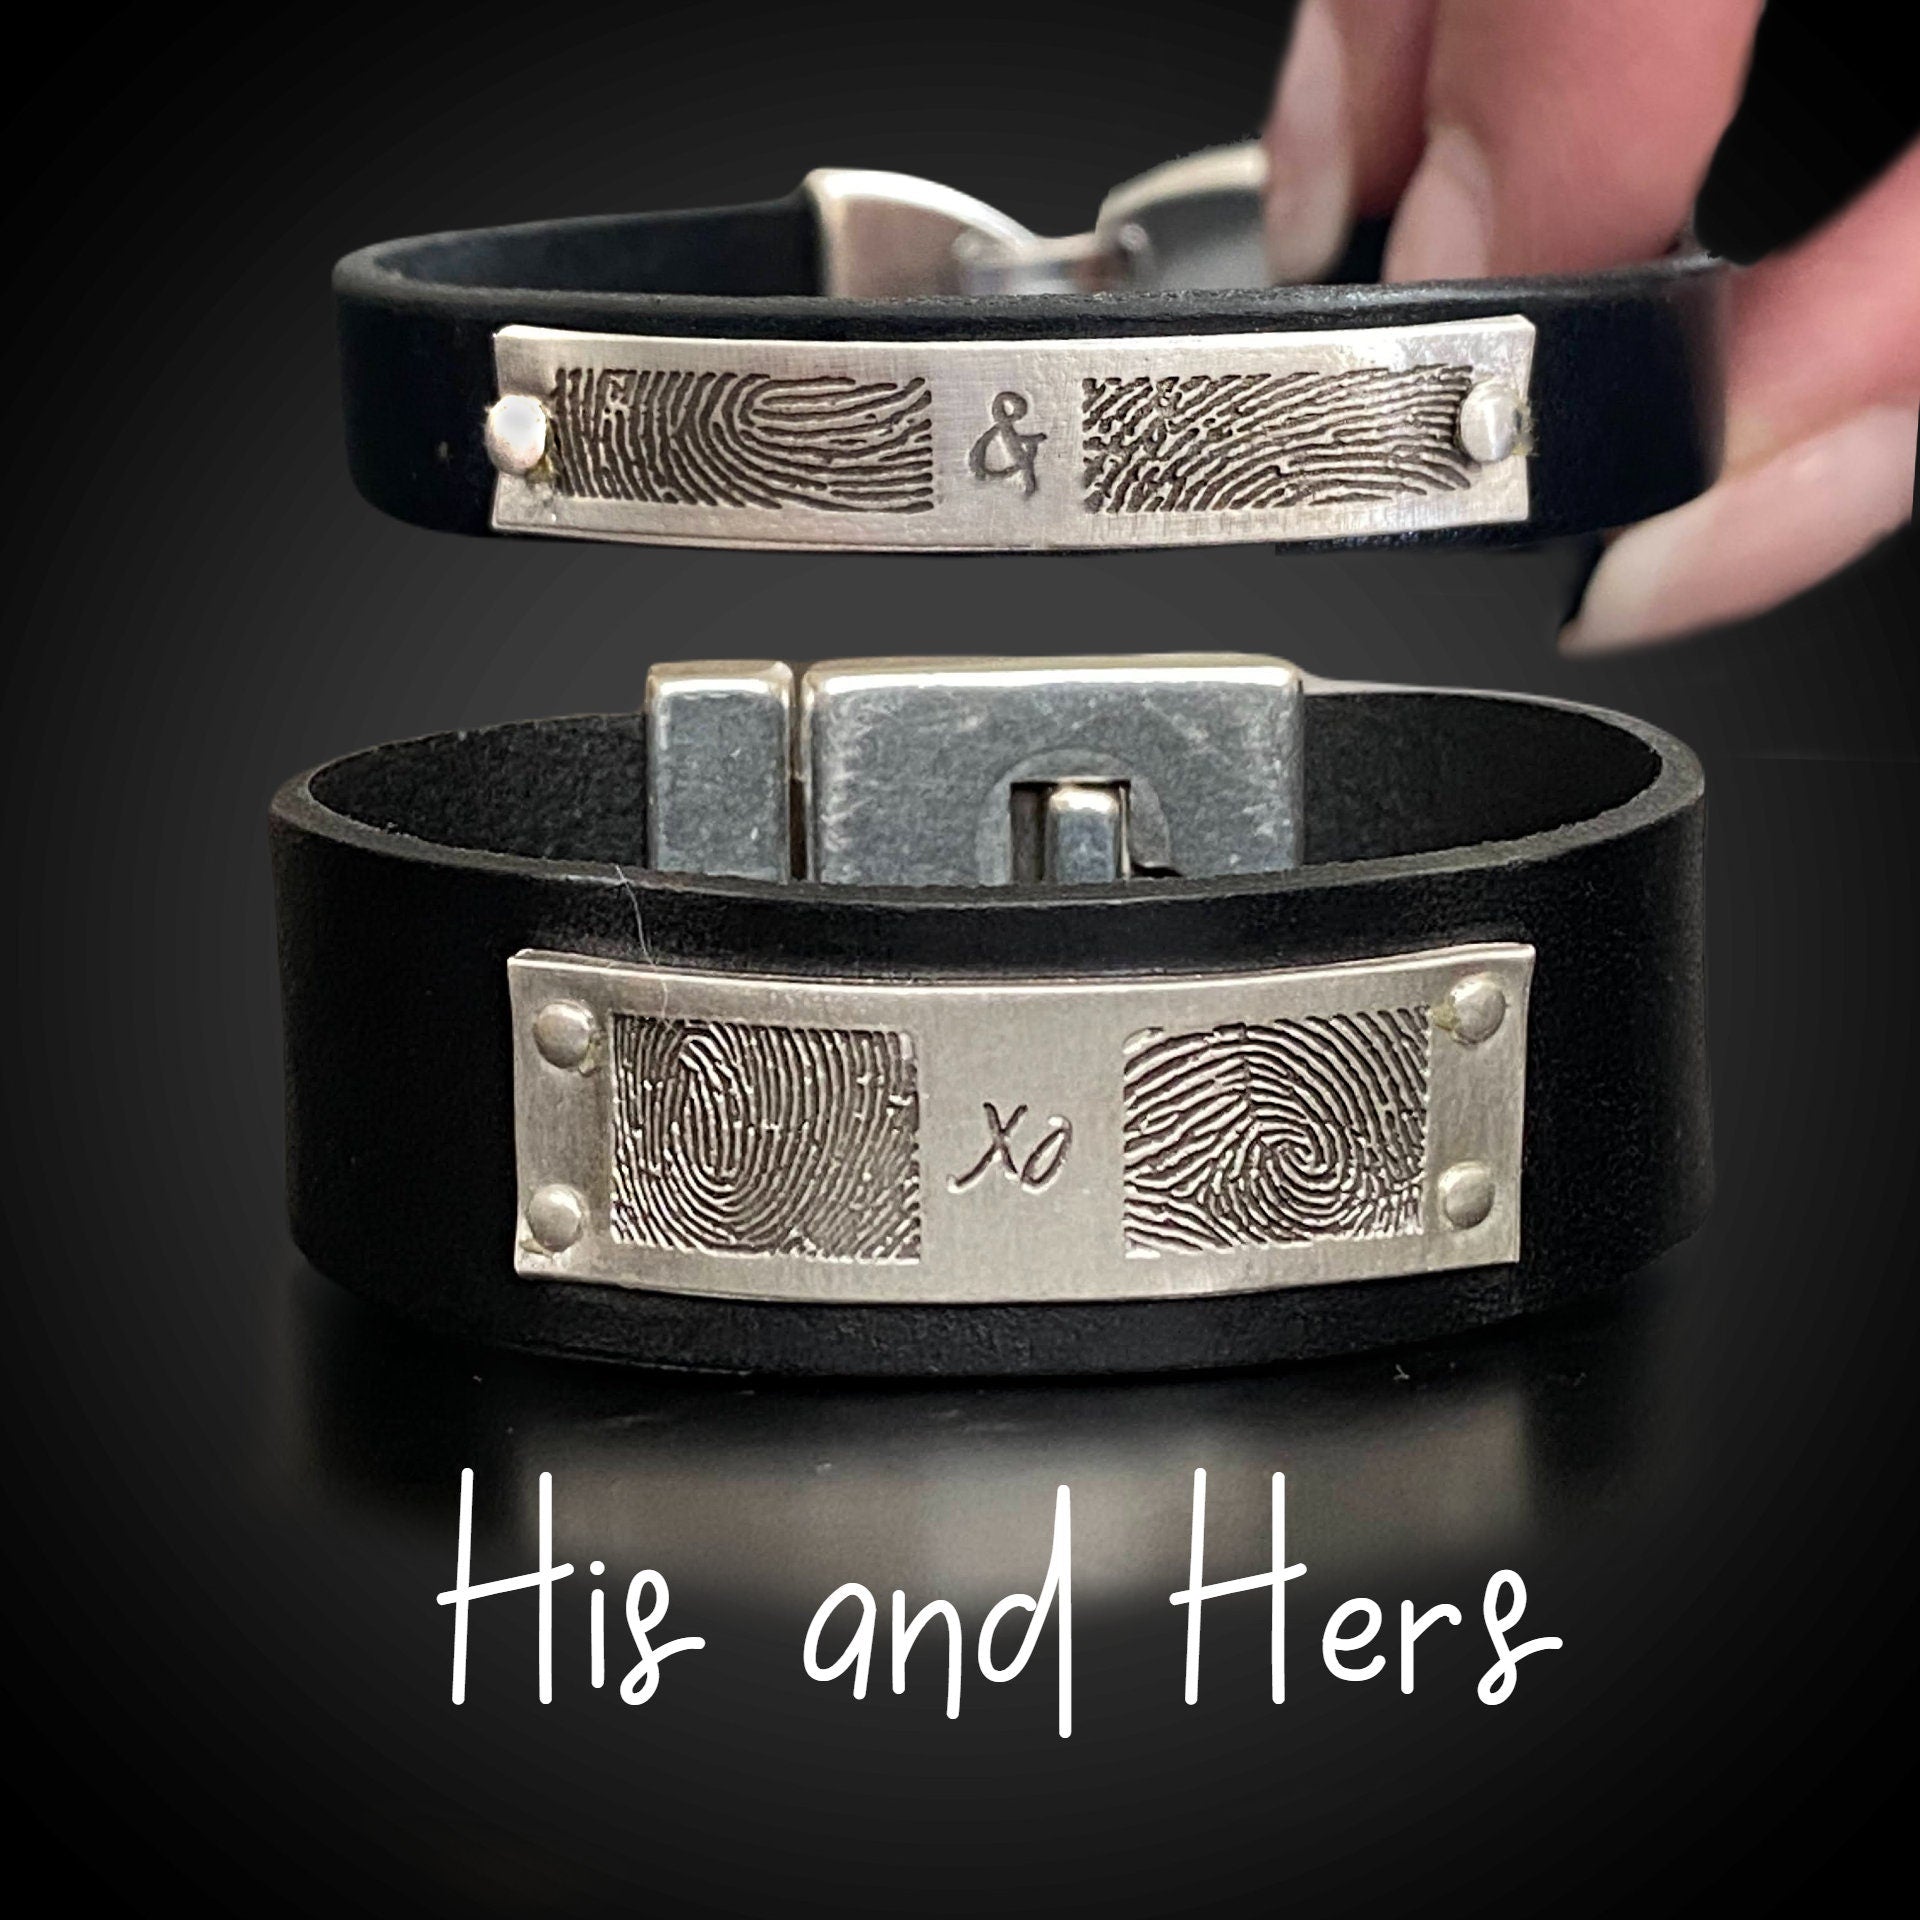 Leather His & Hers Bracelets w/ Sterling Silver Plate with Two Fingerprints